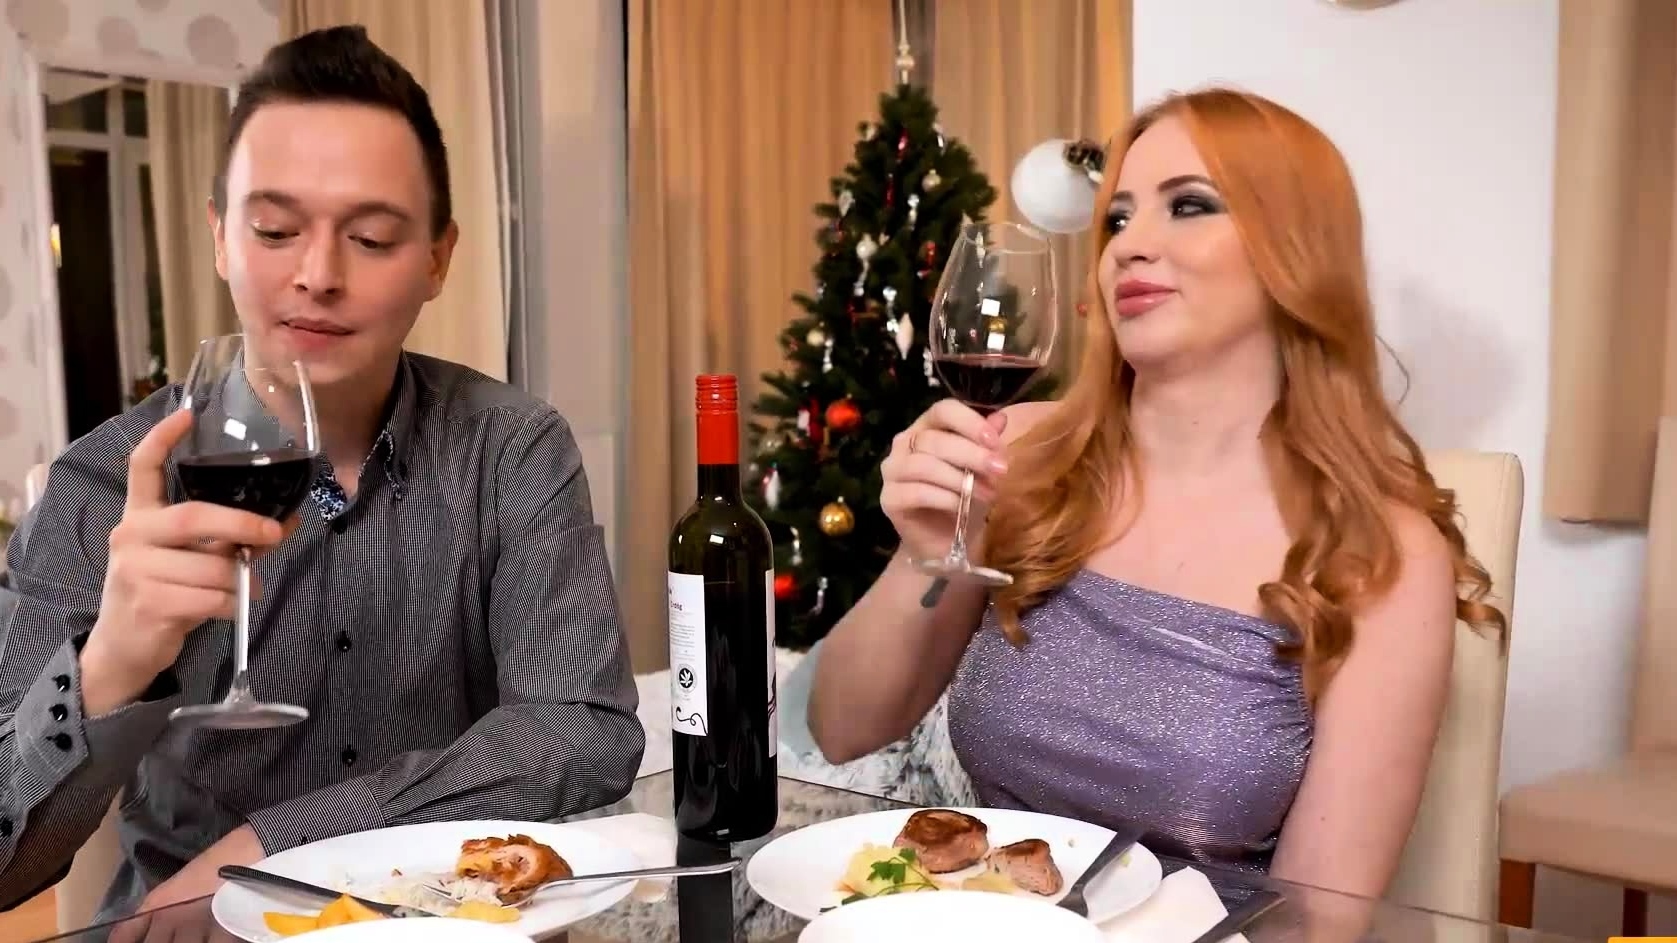 A toast at Christmas dinner for the most beautiful, sexy and busty red-haired bride.